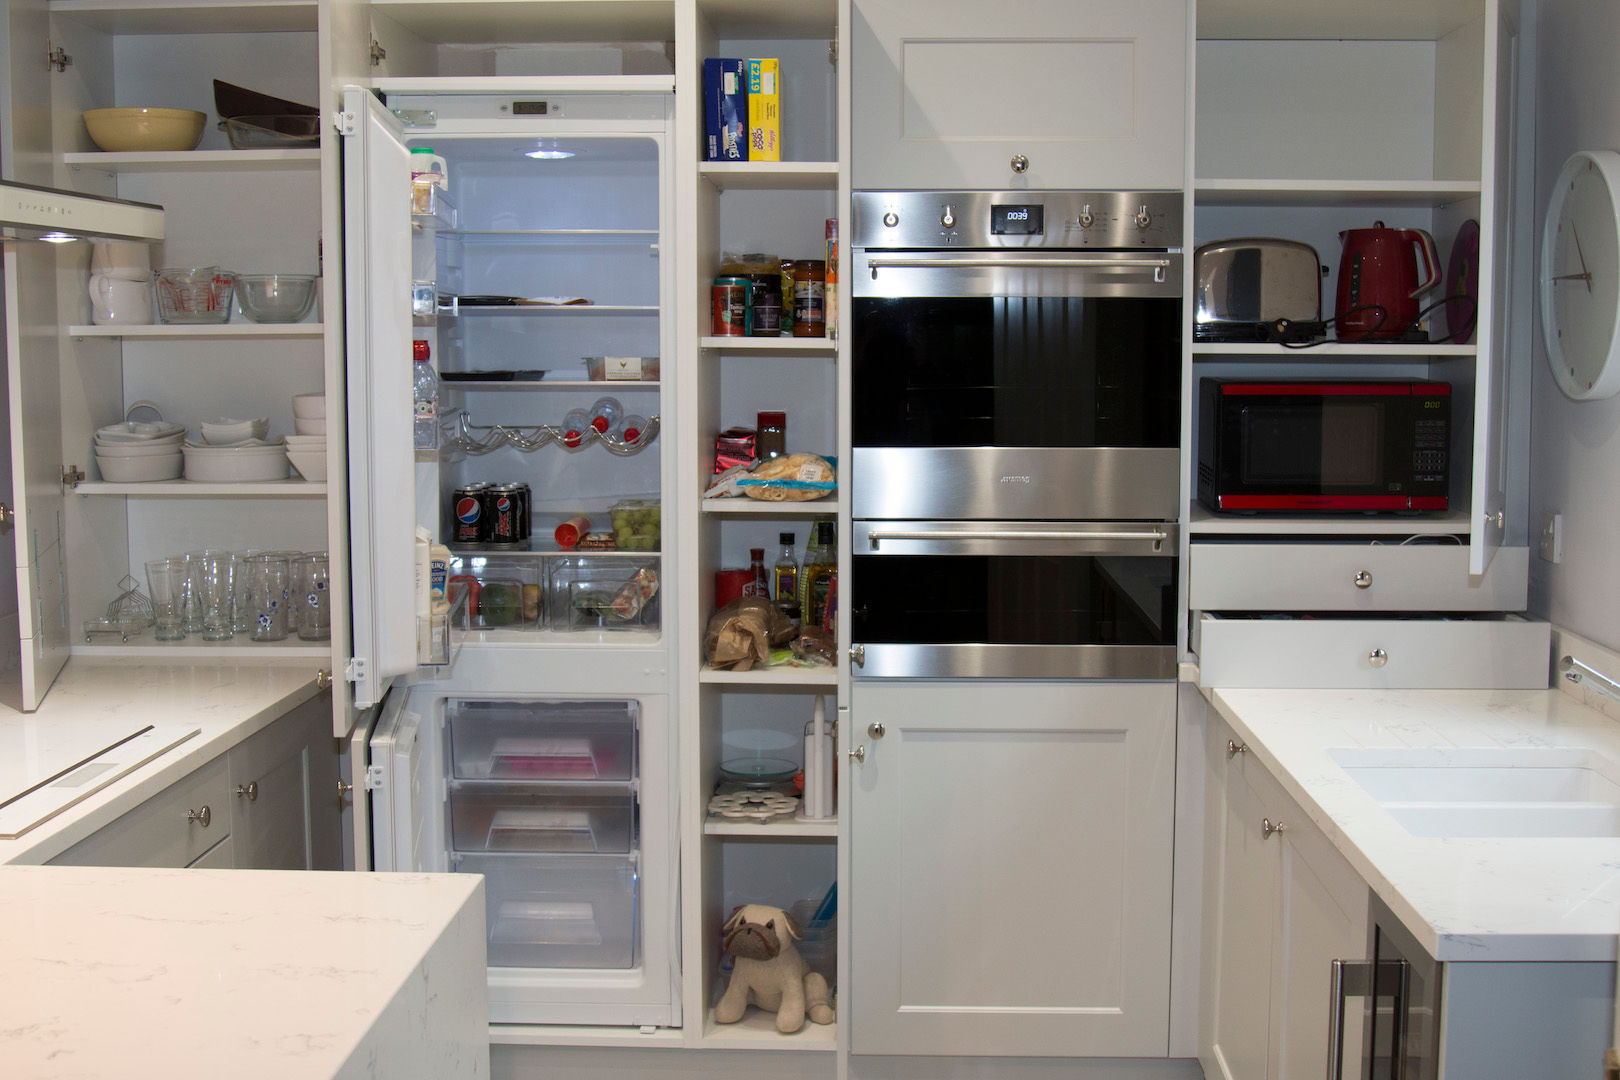 It's amazing how much storage you can have with an Appliance Wall homify Кухня Дерево Дерев'яні grey kitchen,grey cupboards,appliance wall,kitchen storage,classic kitchen,contemporary kitchen,grey doors,SMEG